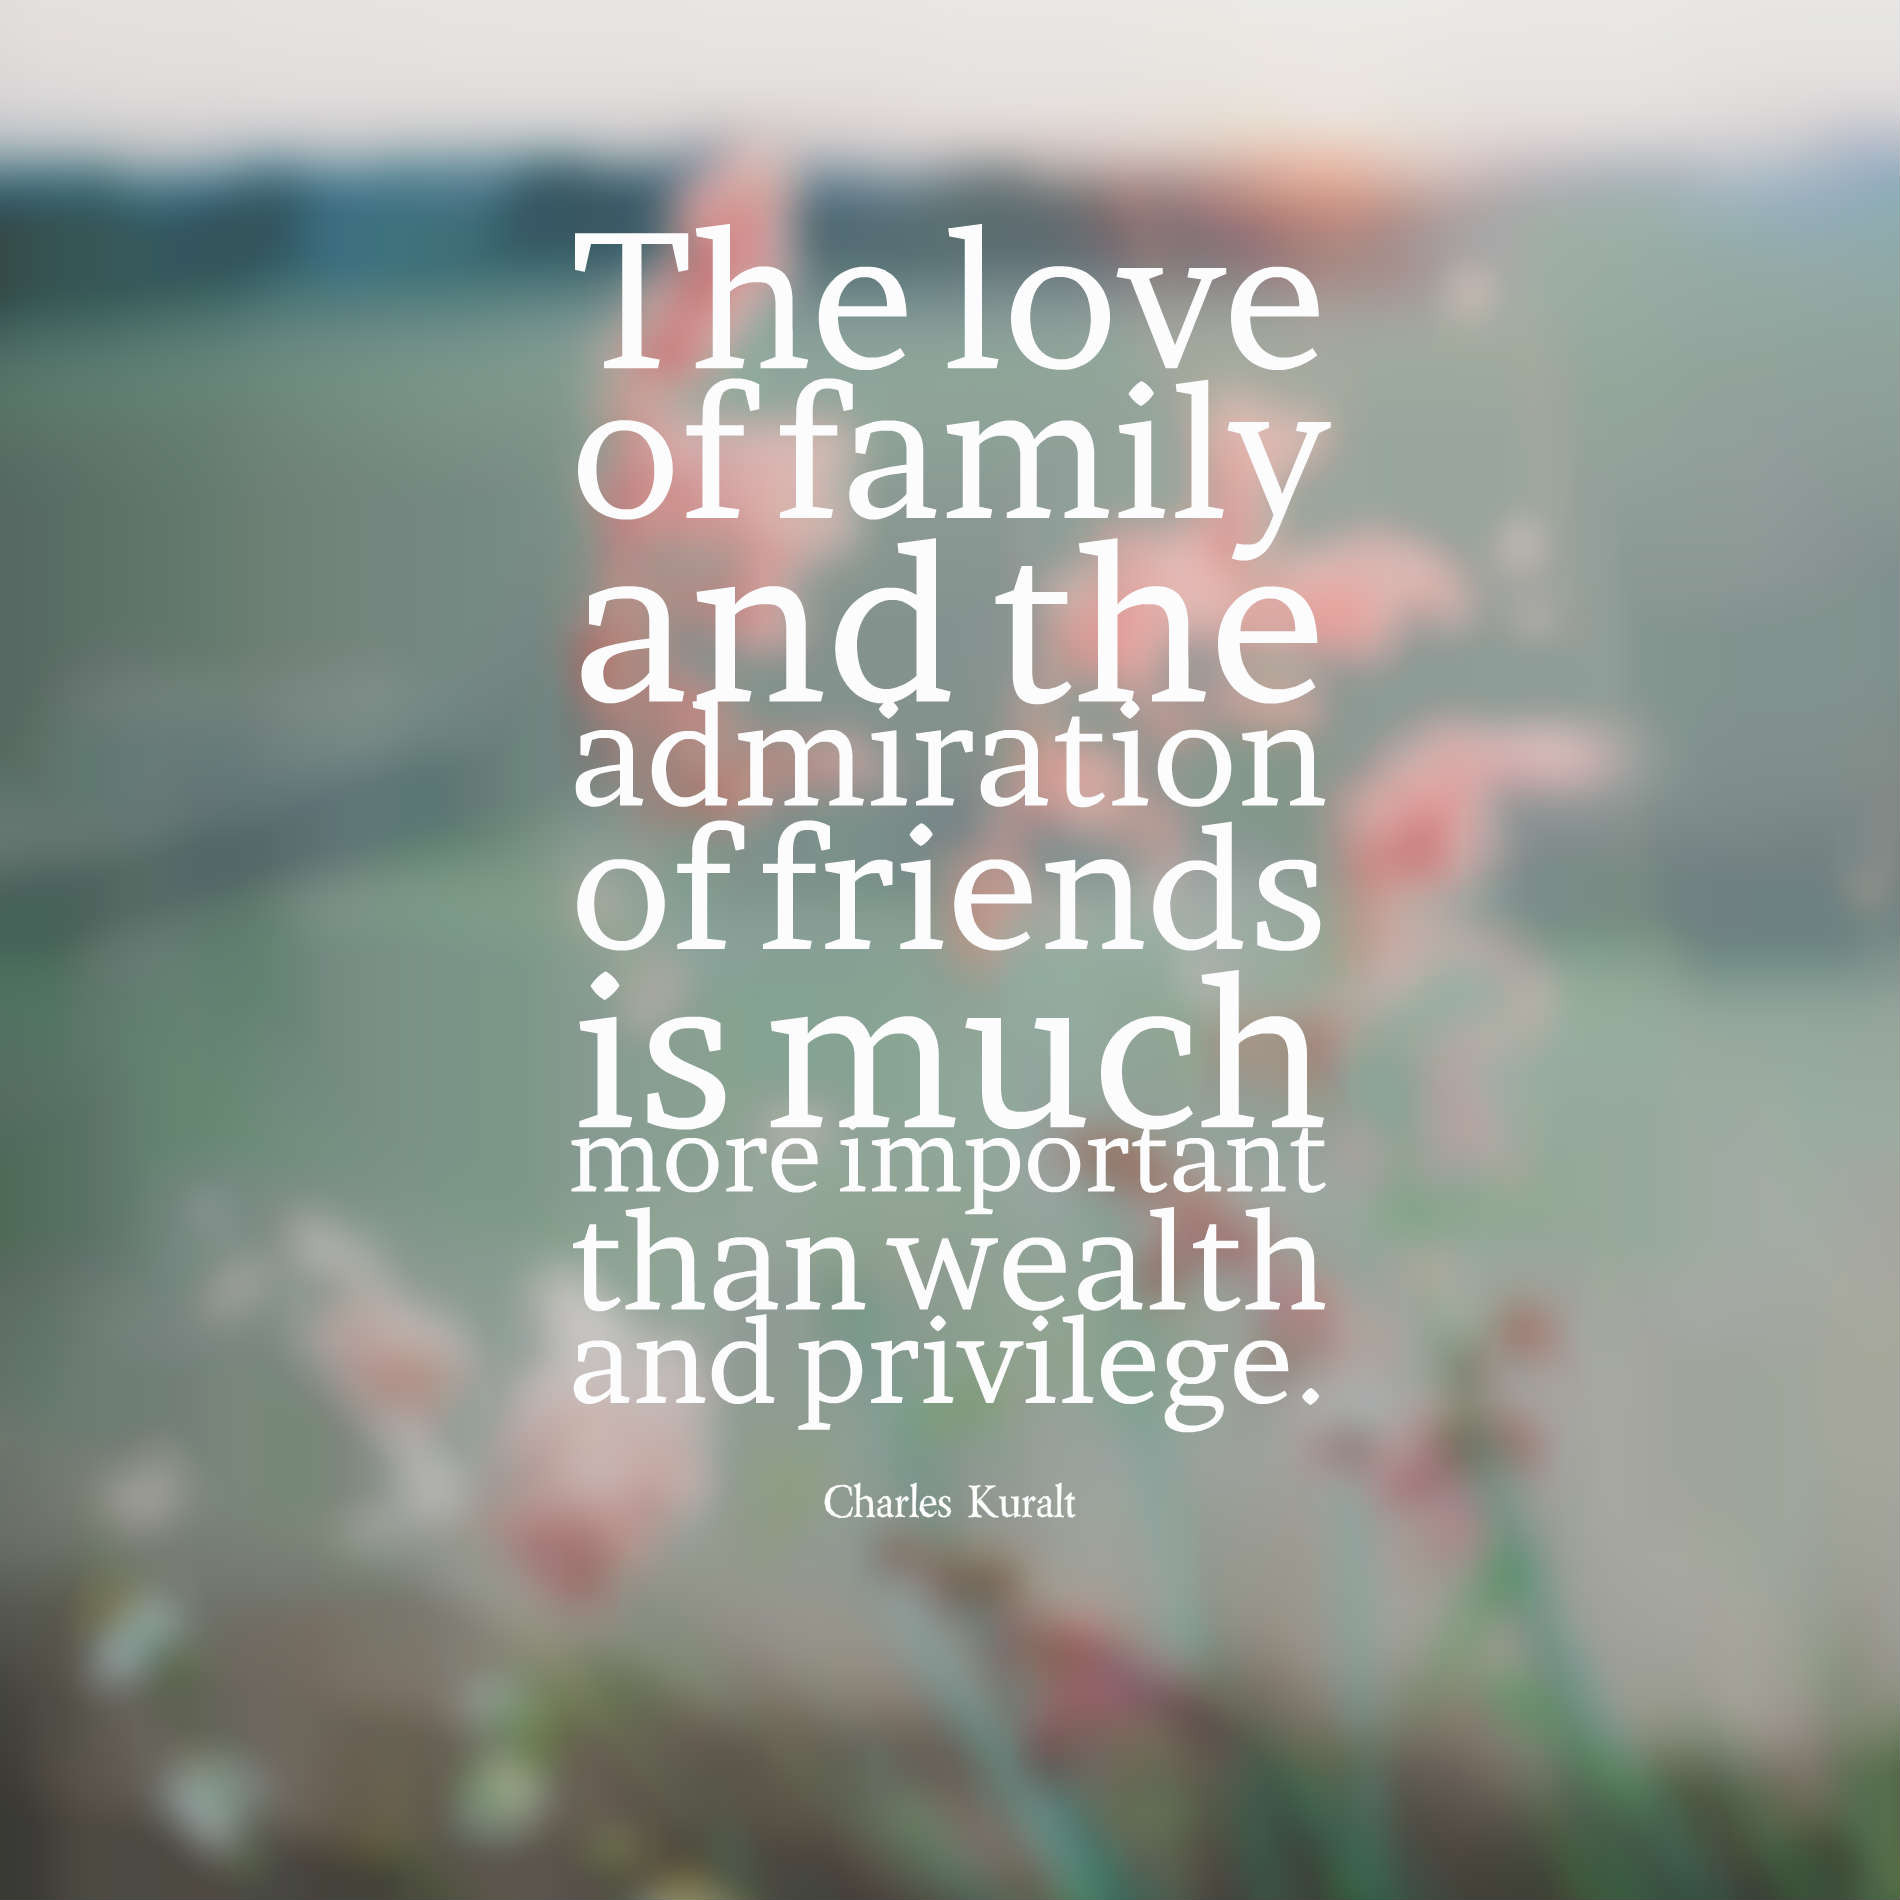 Importance Of Family Quotes
 55 Most Beautiful Family Quotes And Sayings